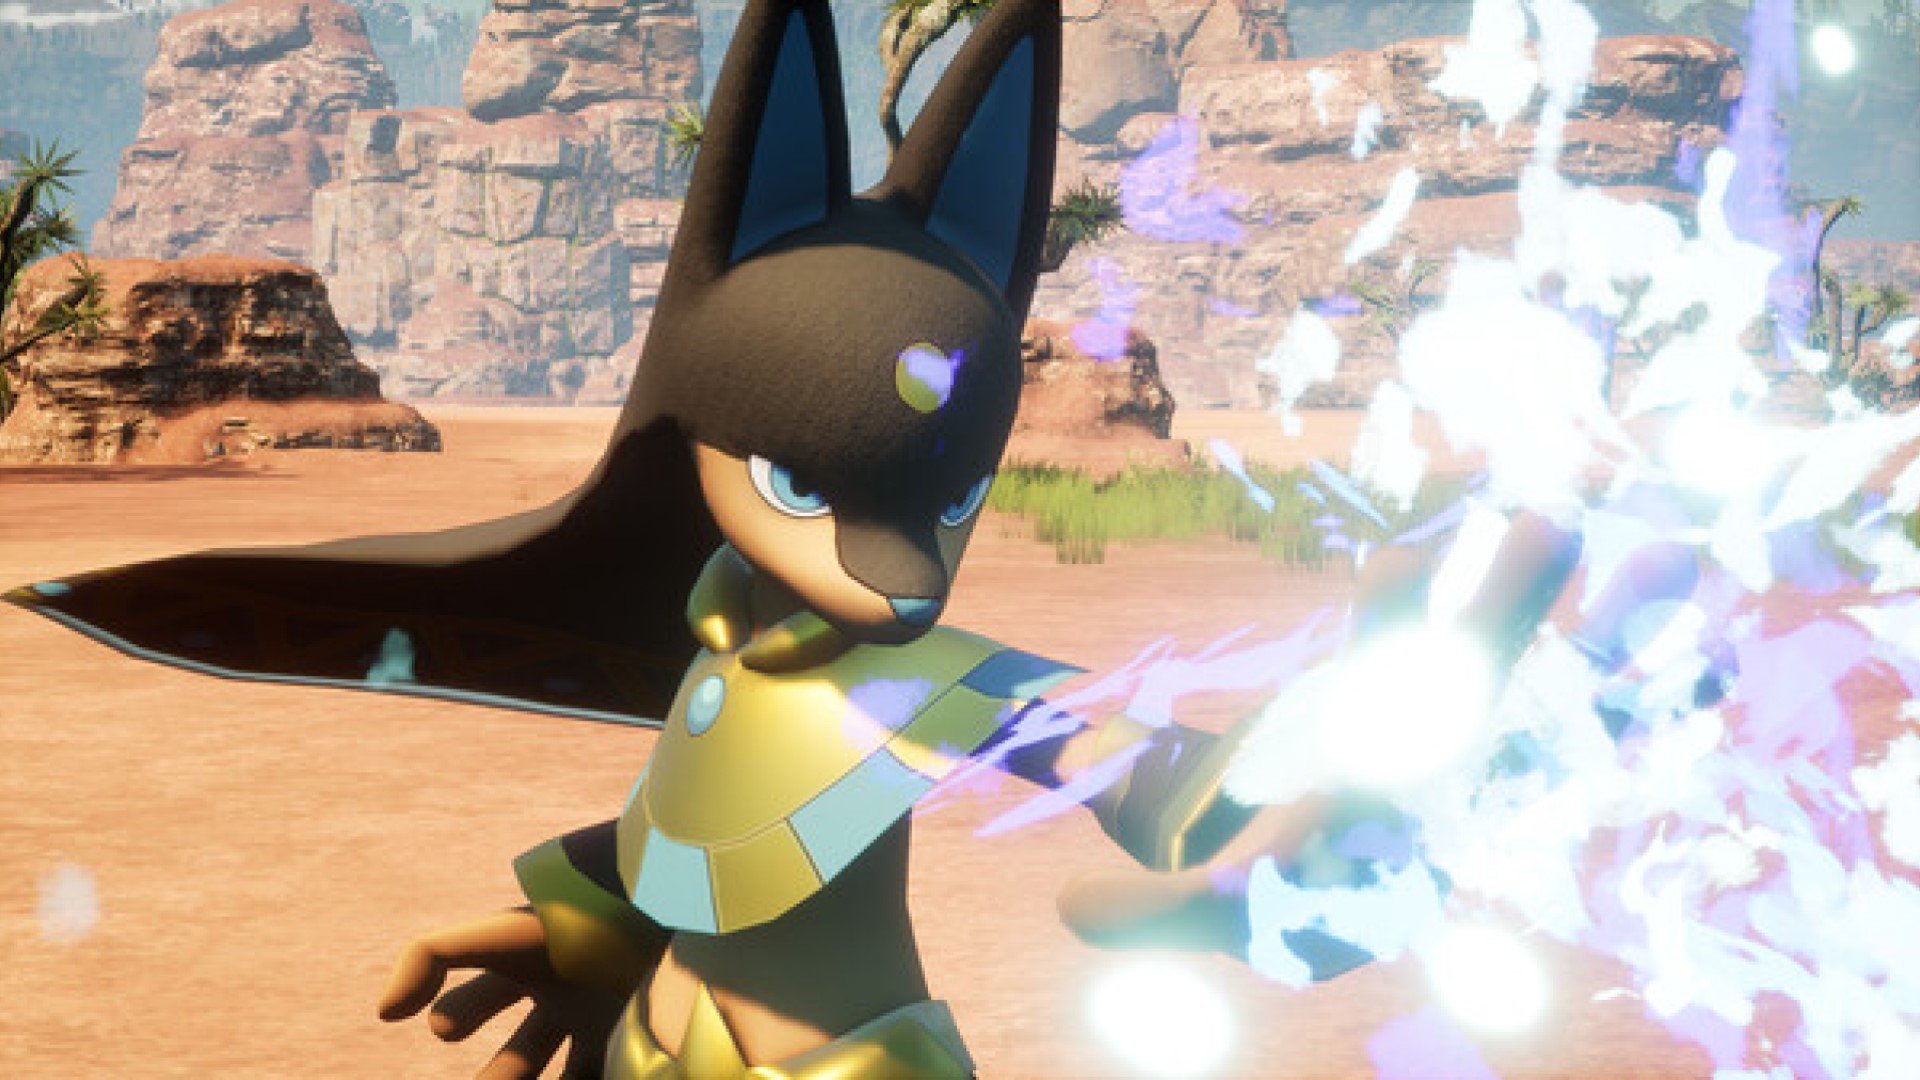 Anubis, a Pal from Palworld, unleashing a powerful-looking attack. He is black and gold in colour, with a dog-like appearance. In the background, a rocky desert landscape.